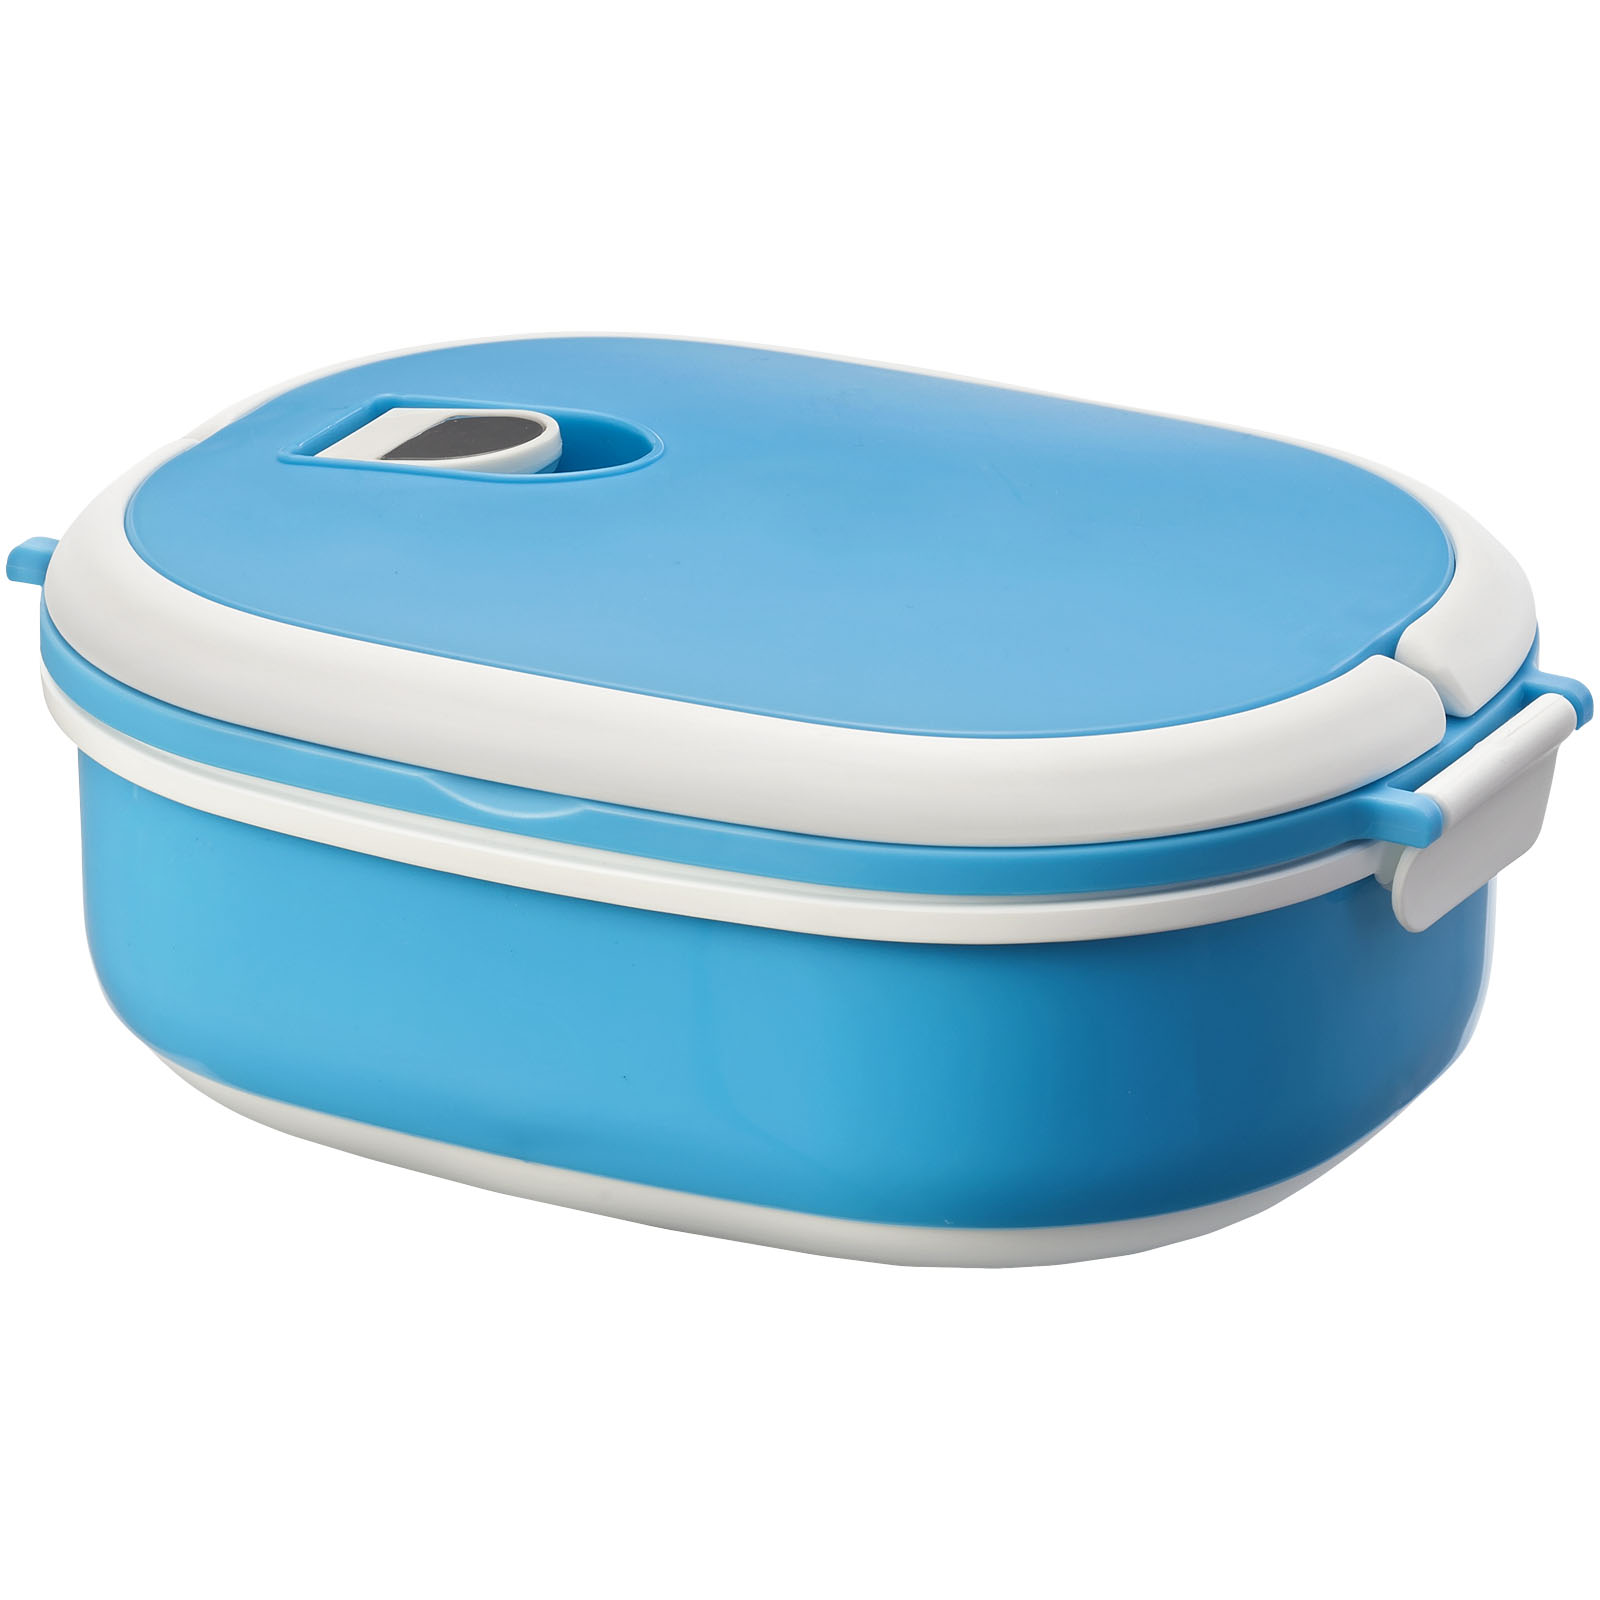 Advertising Lunch Boxes - Spiga 750 ml lunch box - 0